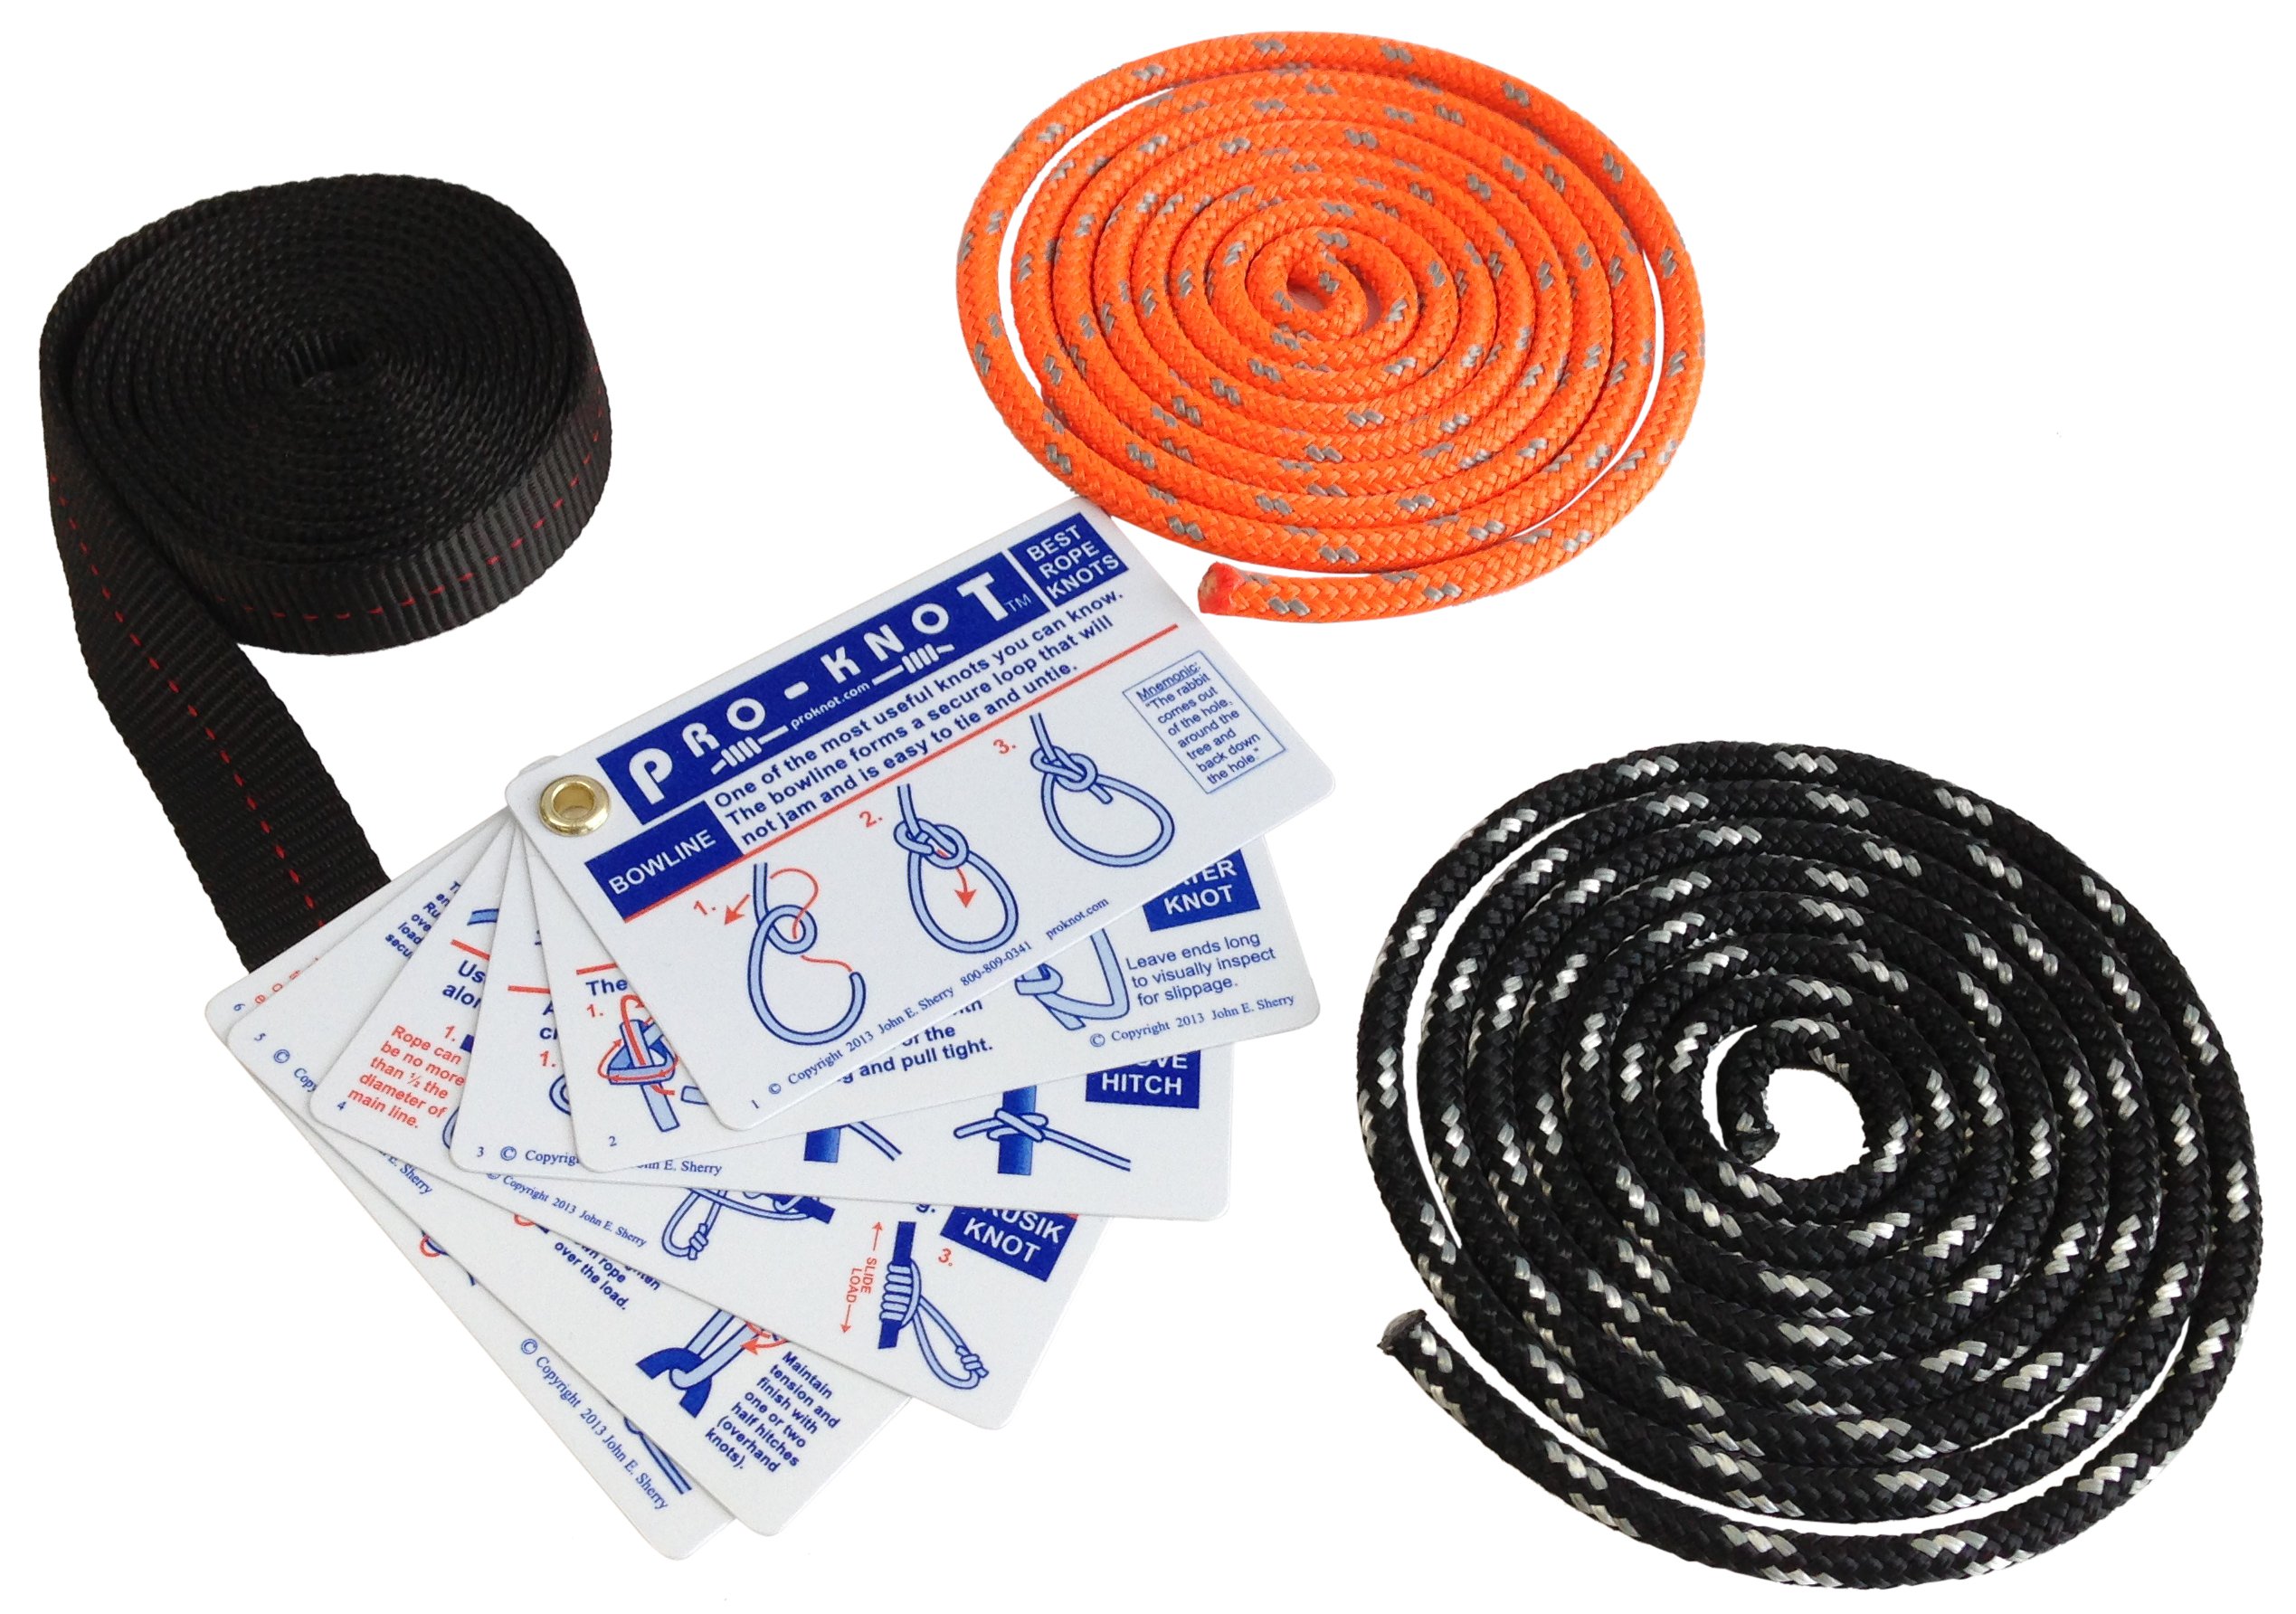 SGT KNOTS Tying Kit - (17) Waterproof Instruction Cards, (2) 6ft  Double-Braided Ropes, (1) 6ft Nylon